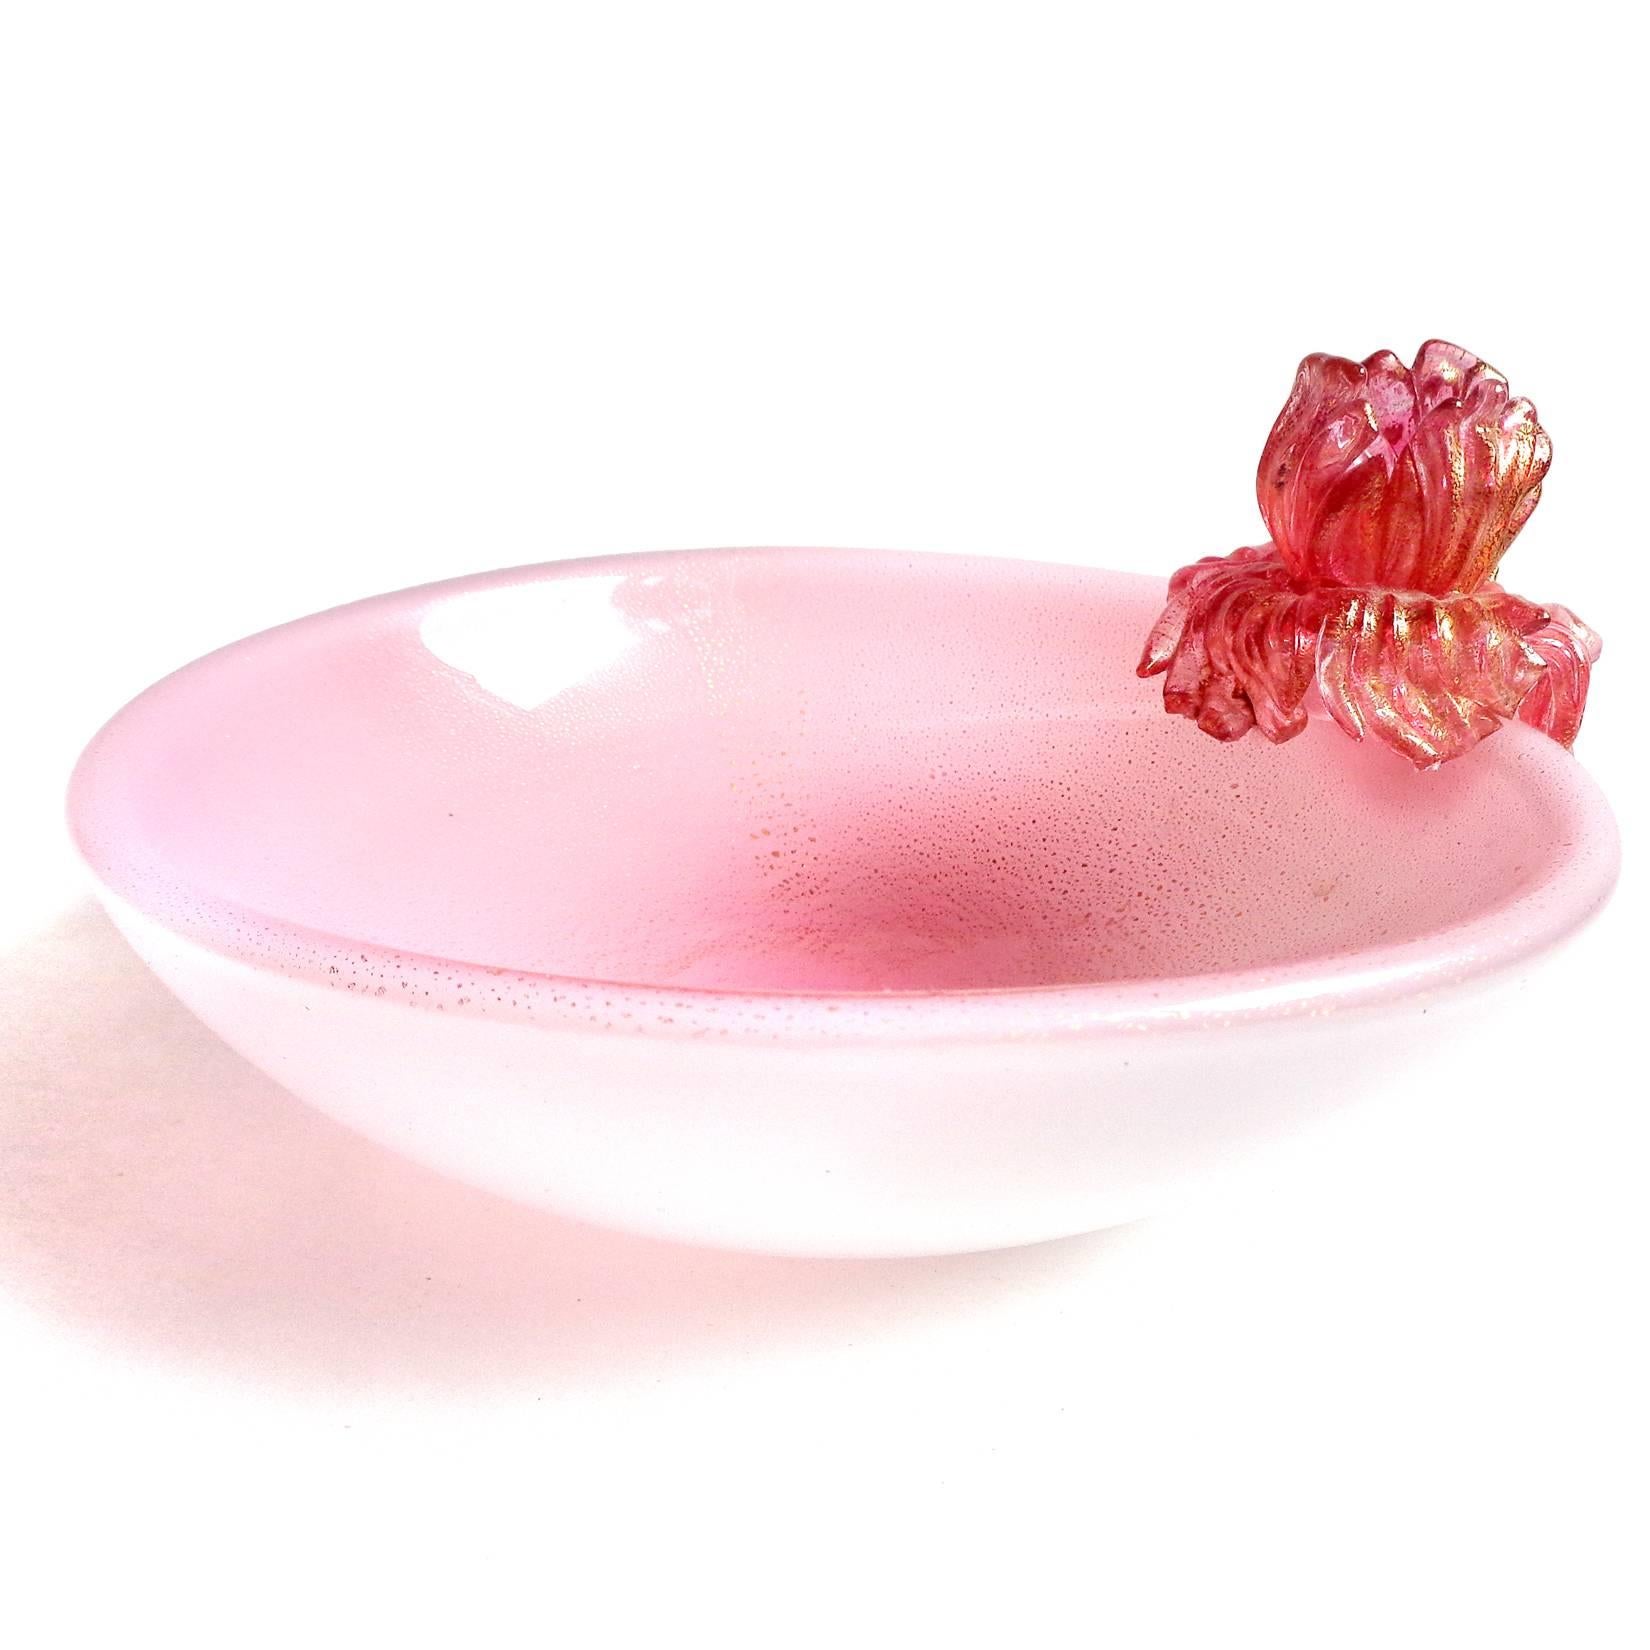 Free shipping worldwide! See details below description.

Gorgeous Murano handblown pink, white and gold art glass bowl with applied flower. Documented to designer Archimede Seguso, with two original labels. Perfect for any side table or vanity.